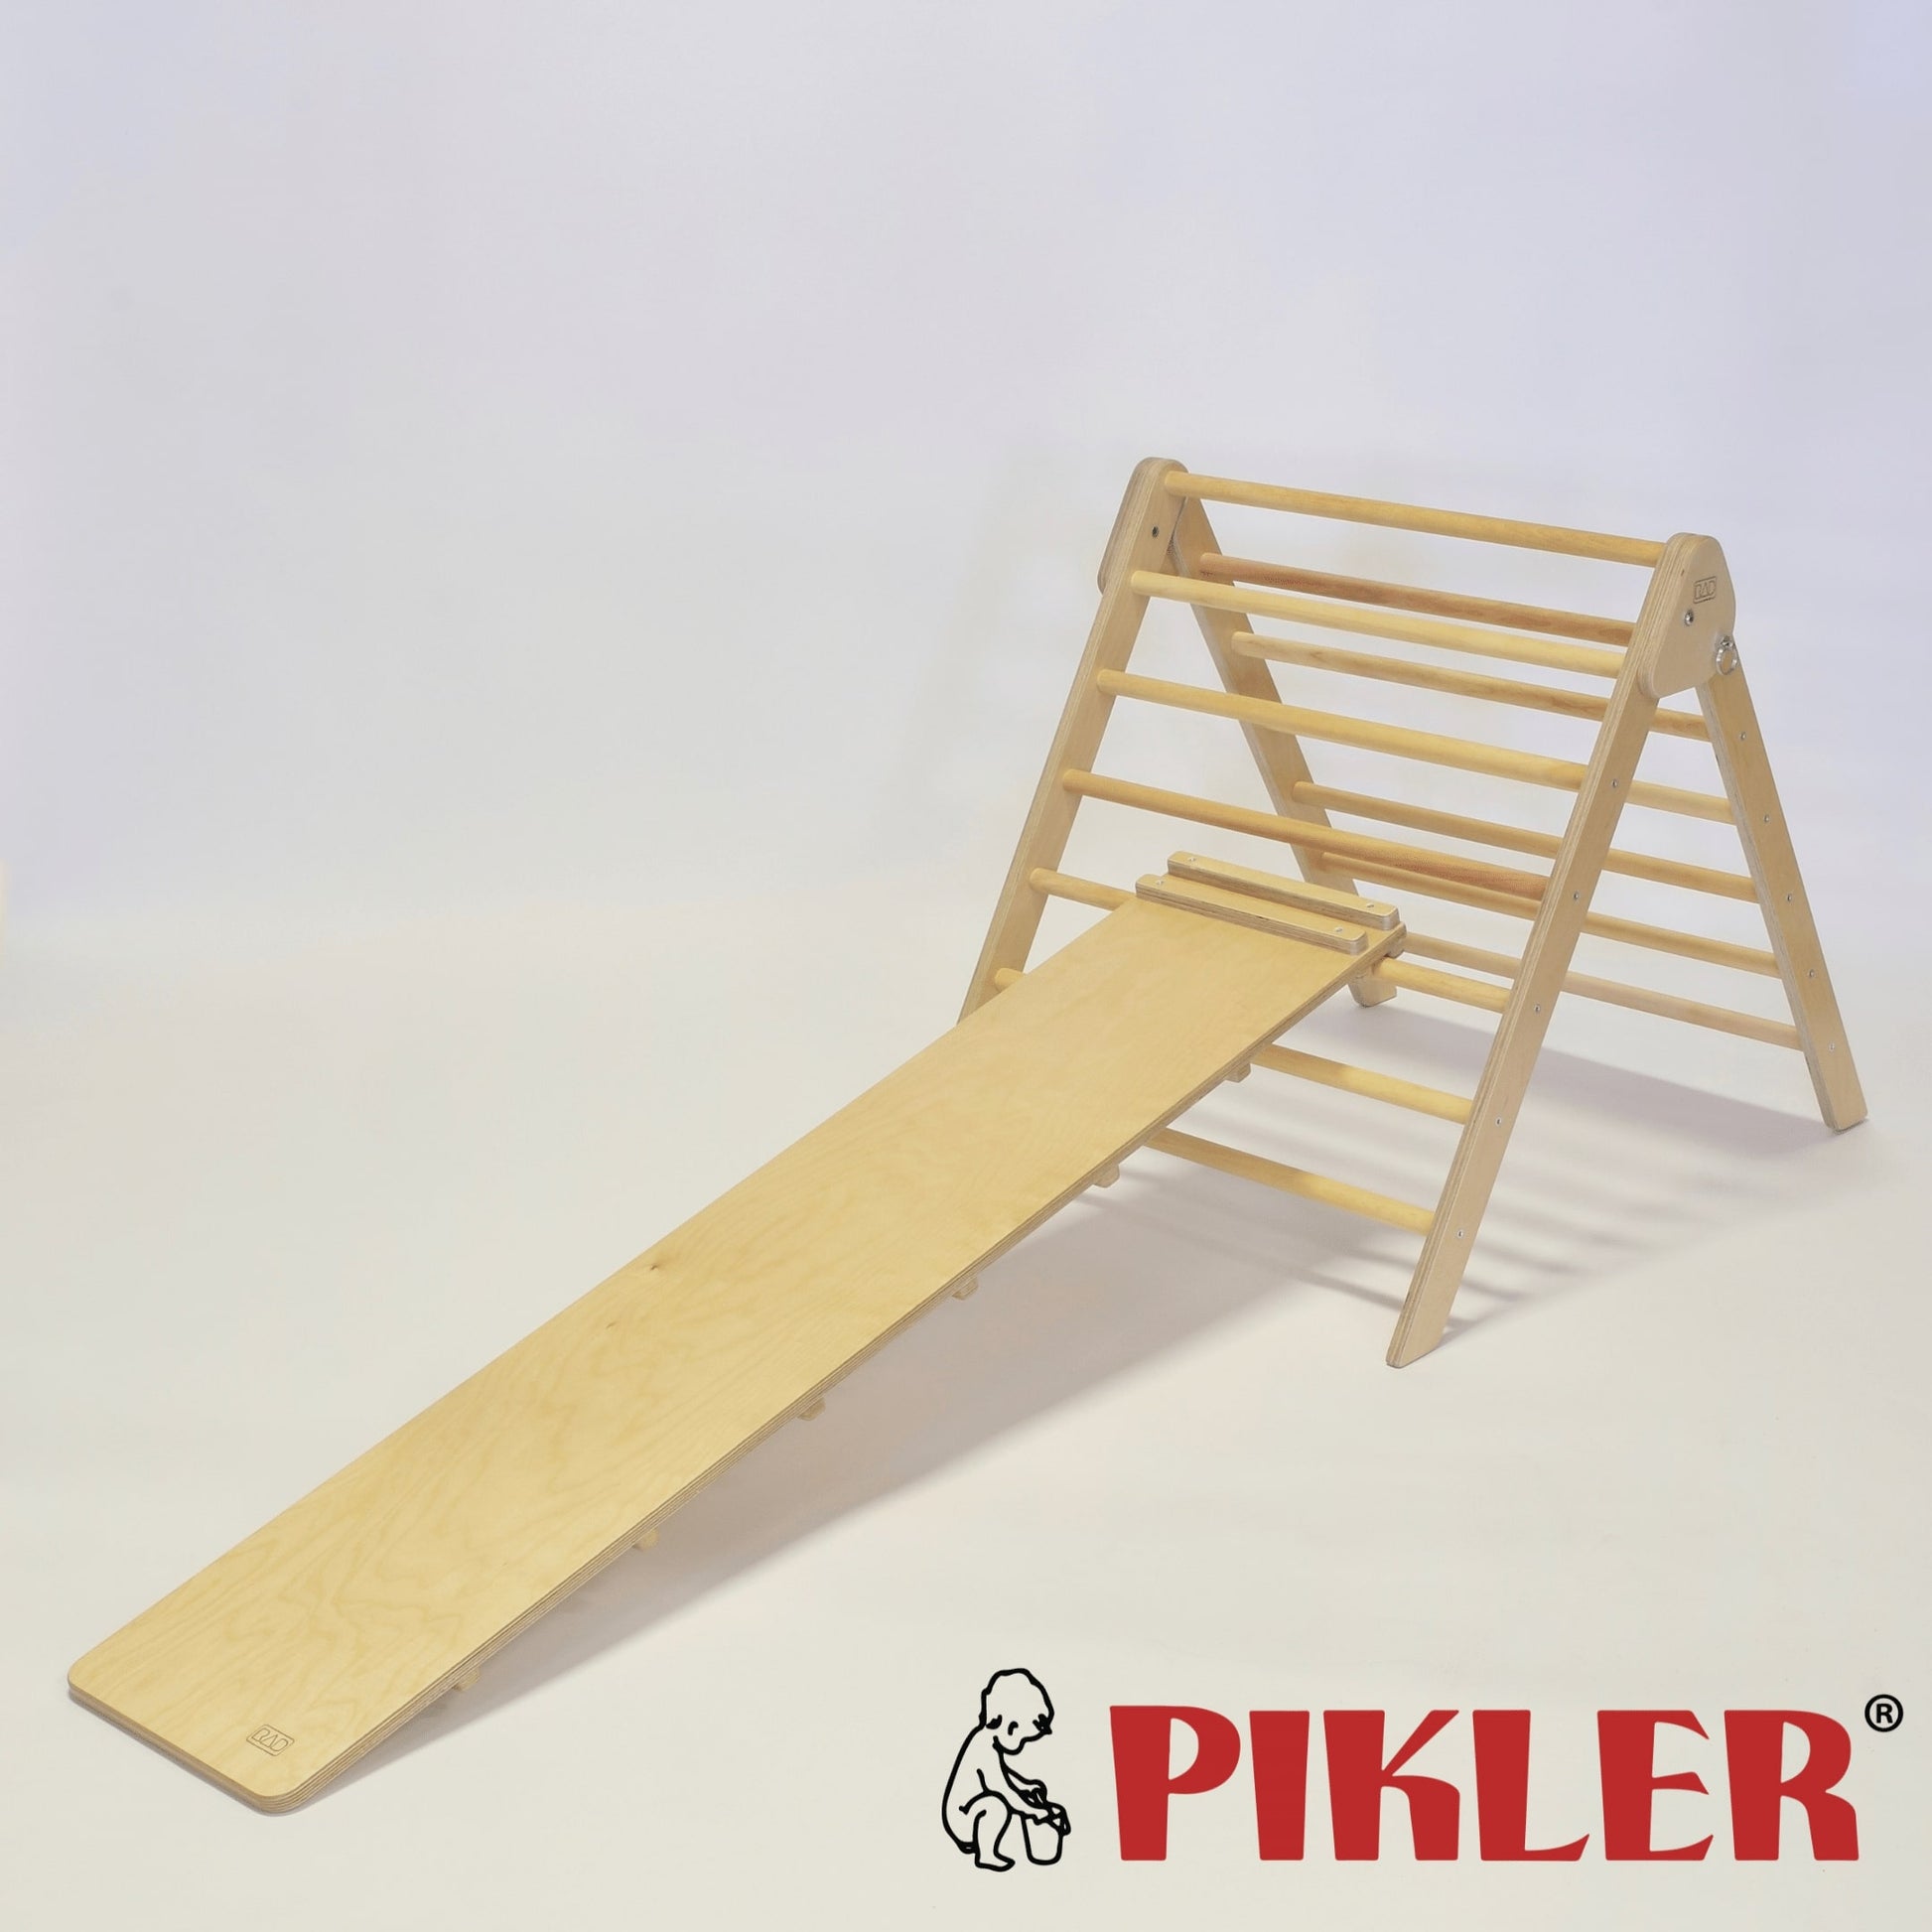 Wooden montessori climber with toddler board. 